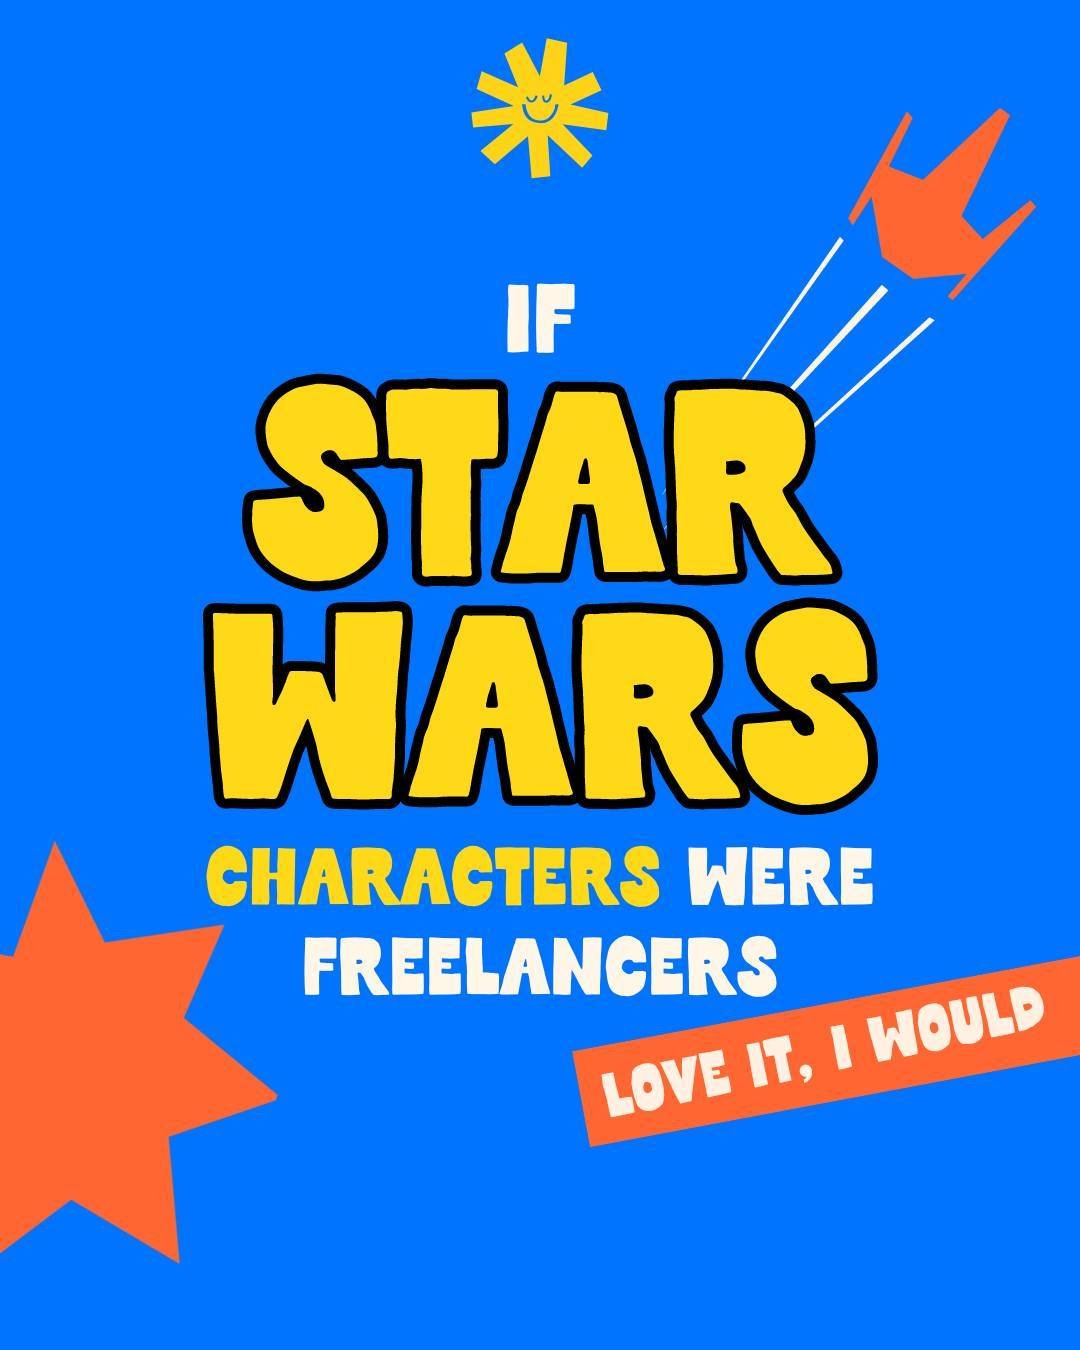 With you May the 4th be, freelancers⭐⁠
⁠
I bet you've never thought about which Star Wars character best fits your freelancing style, have you?⁠
⁠
Well, now's your chance! ⁠
⁠
I'm a Chewy, I reckon 🤔 Who are you?